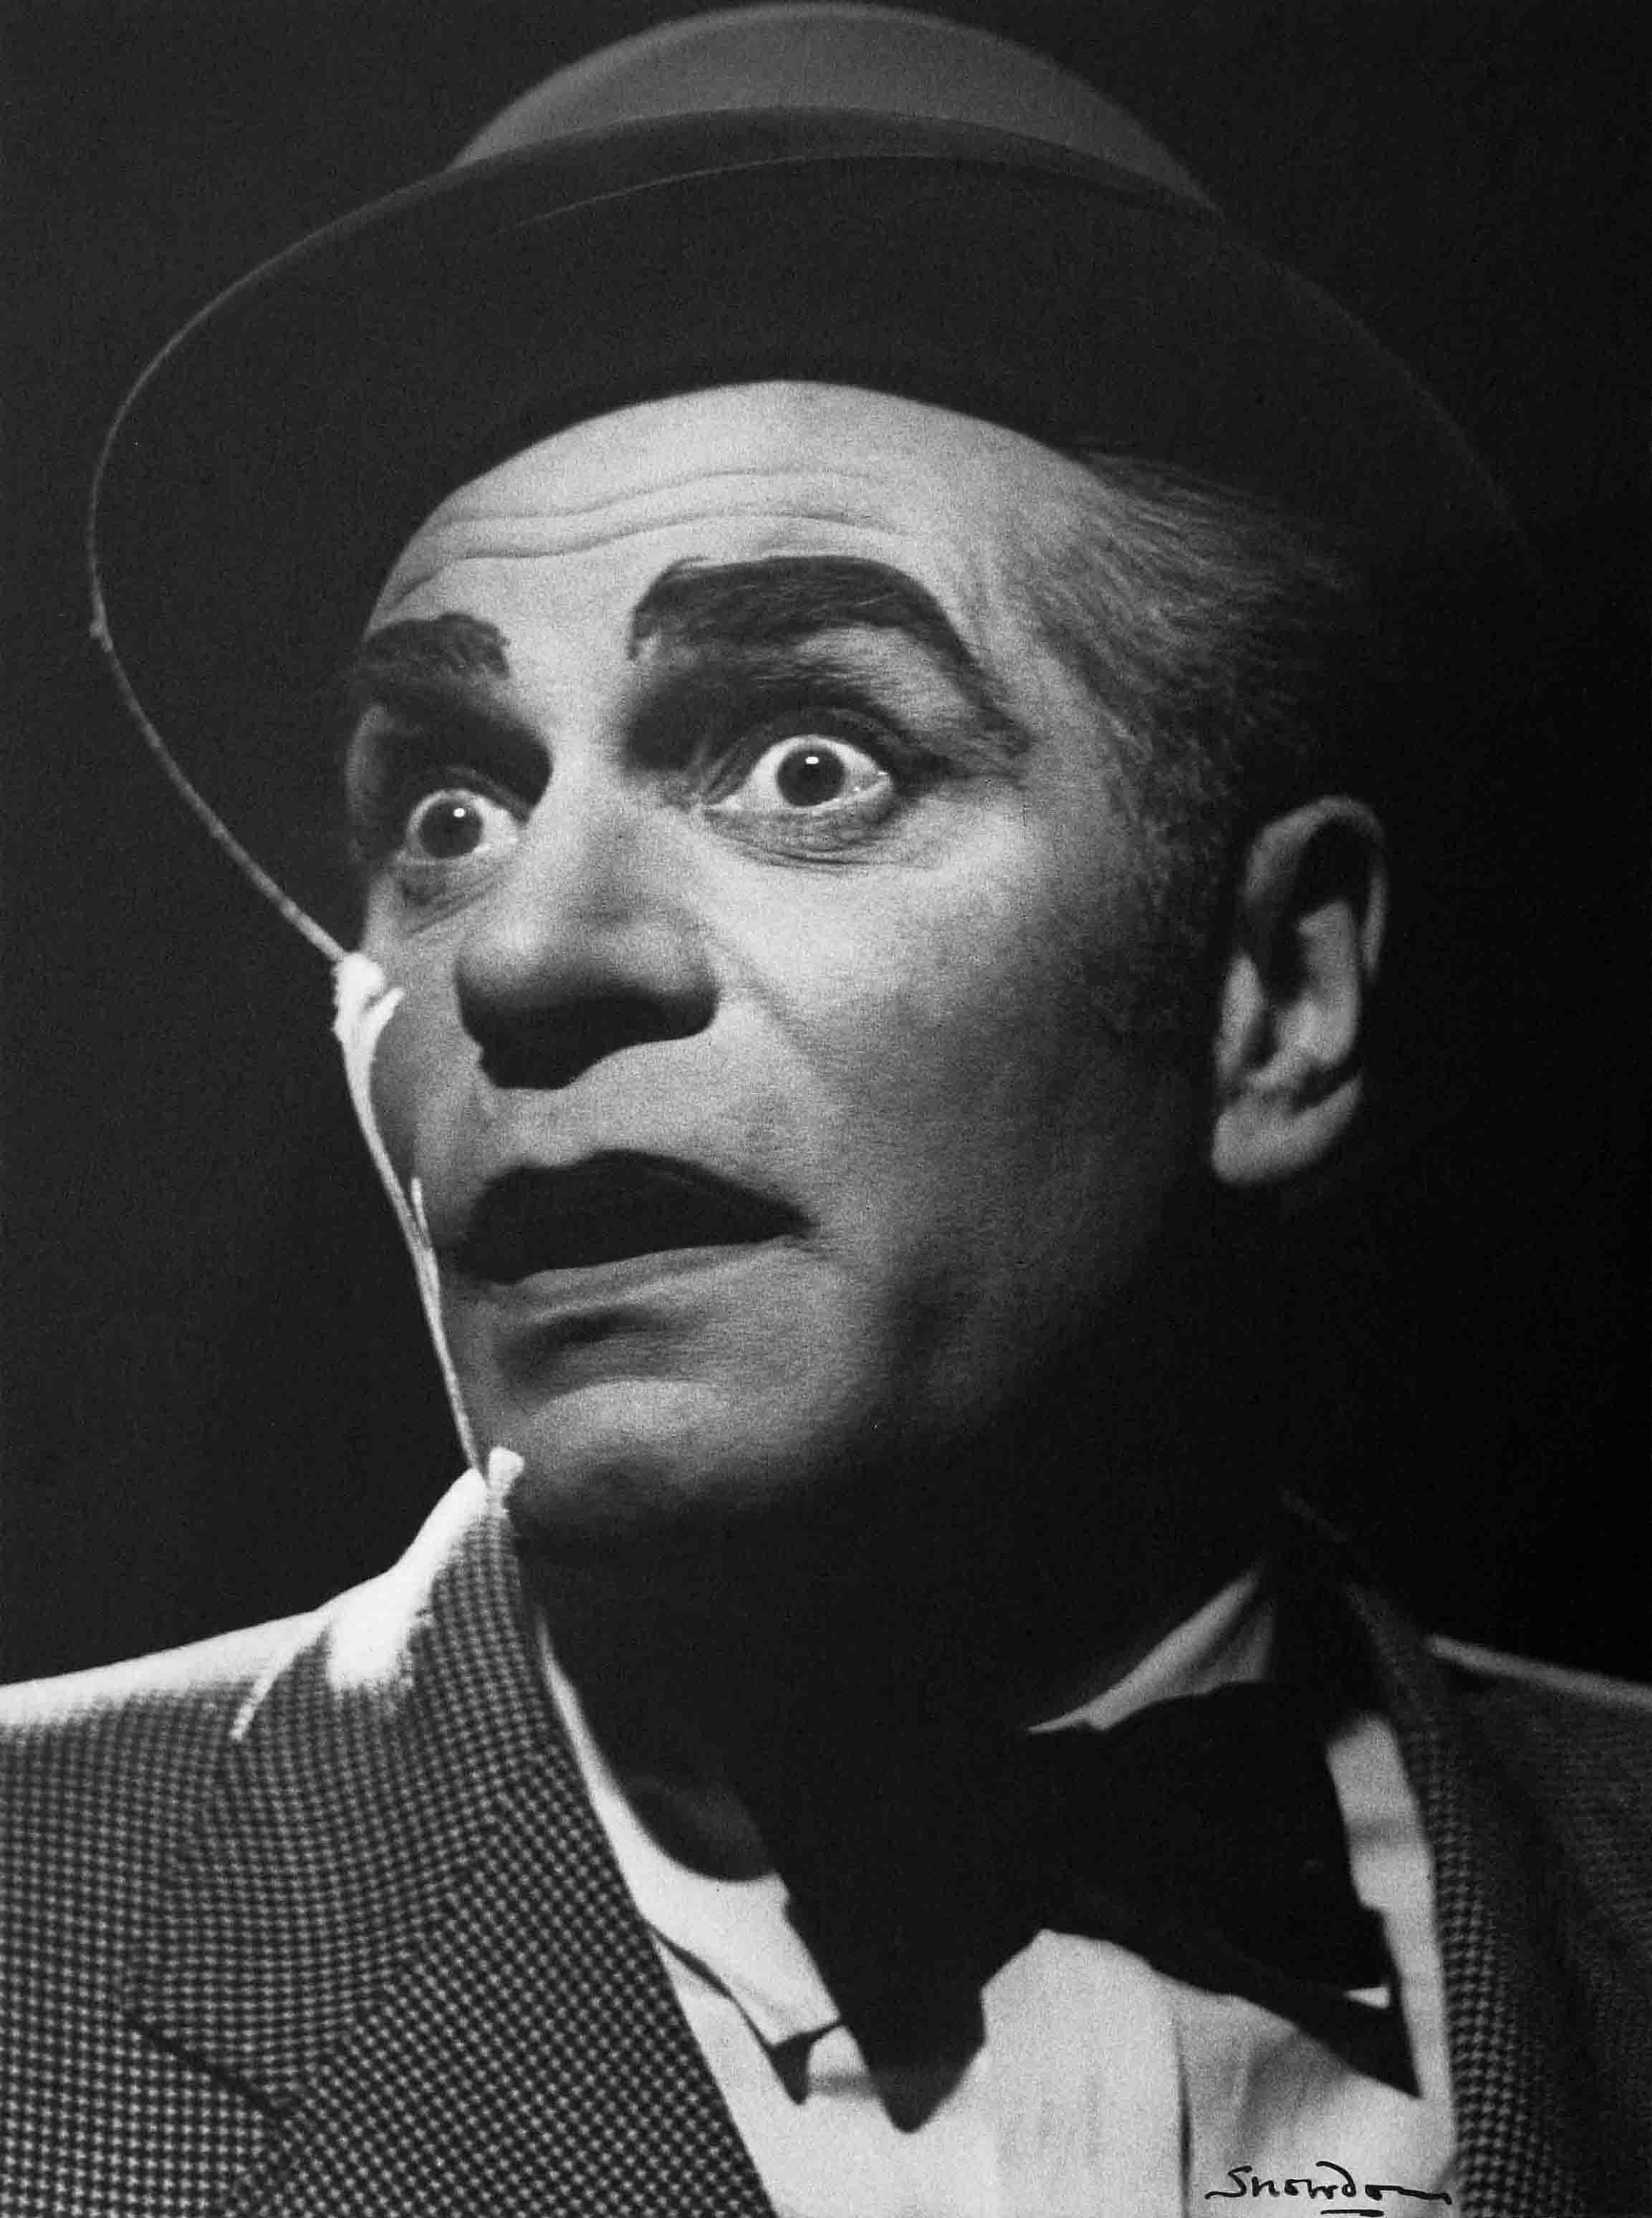 Antony Armstrong-Jones, 'Laurence Olivier as Archie Rice in The Entertainer’ Royal Court Theatre, London, 1957'